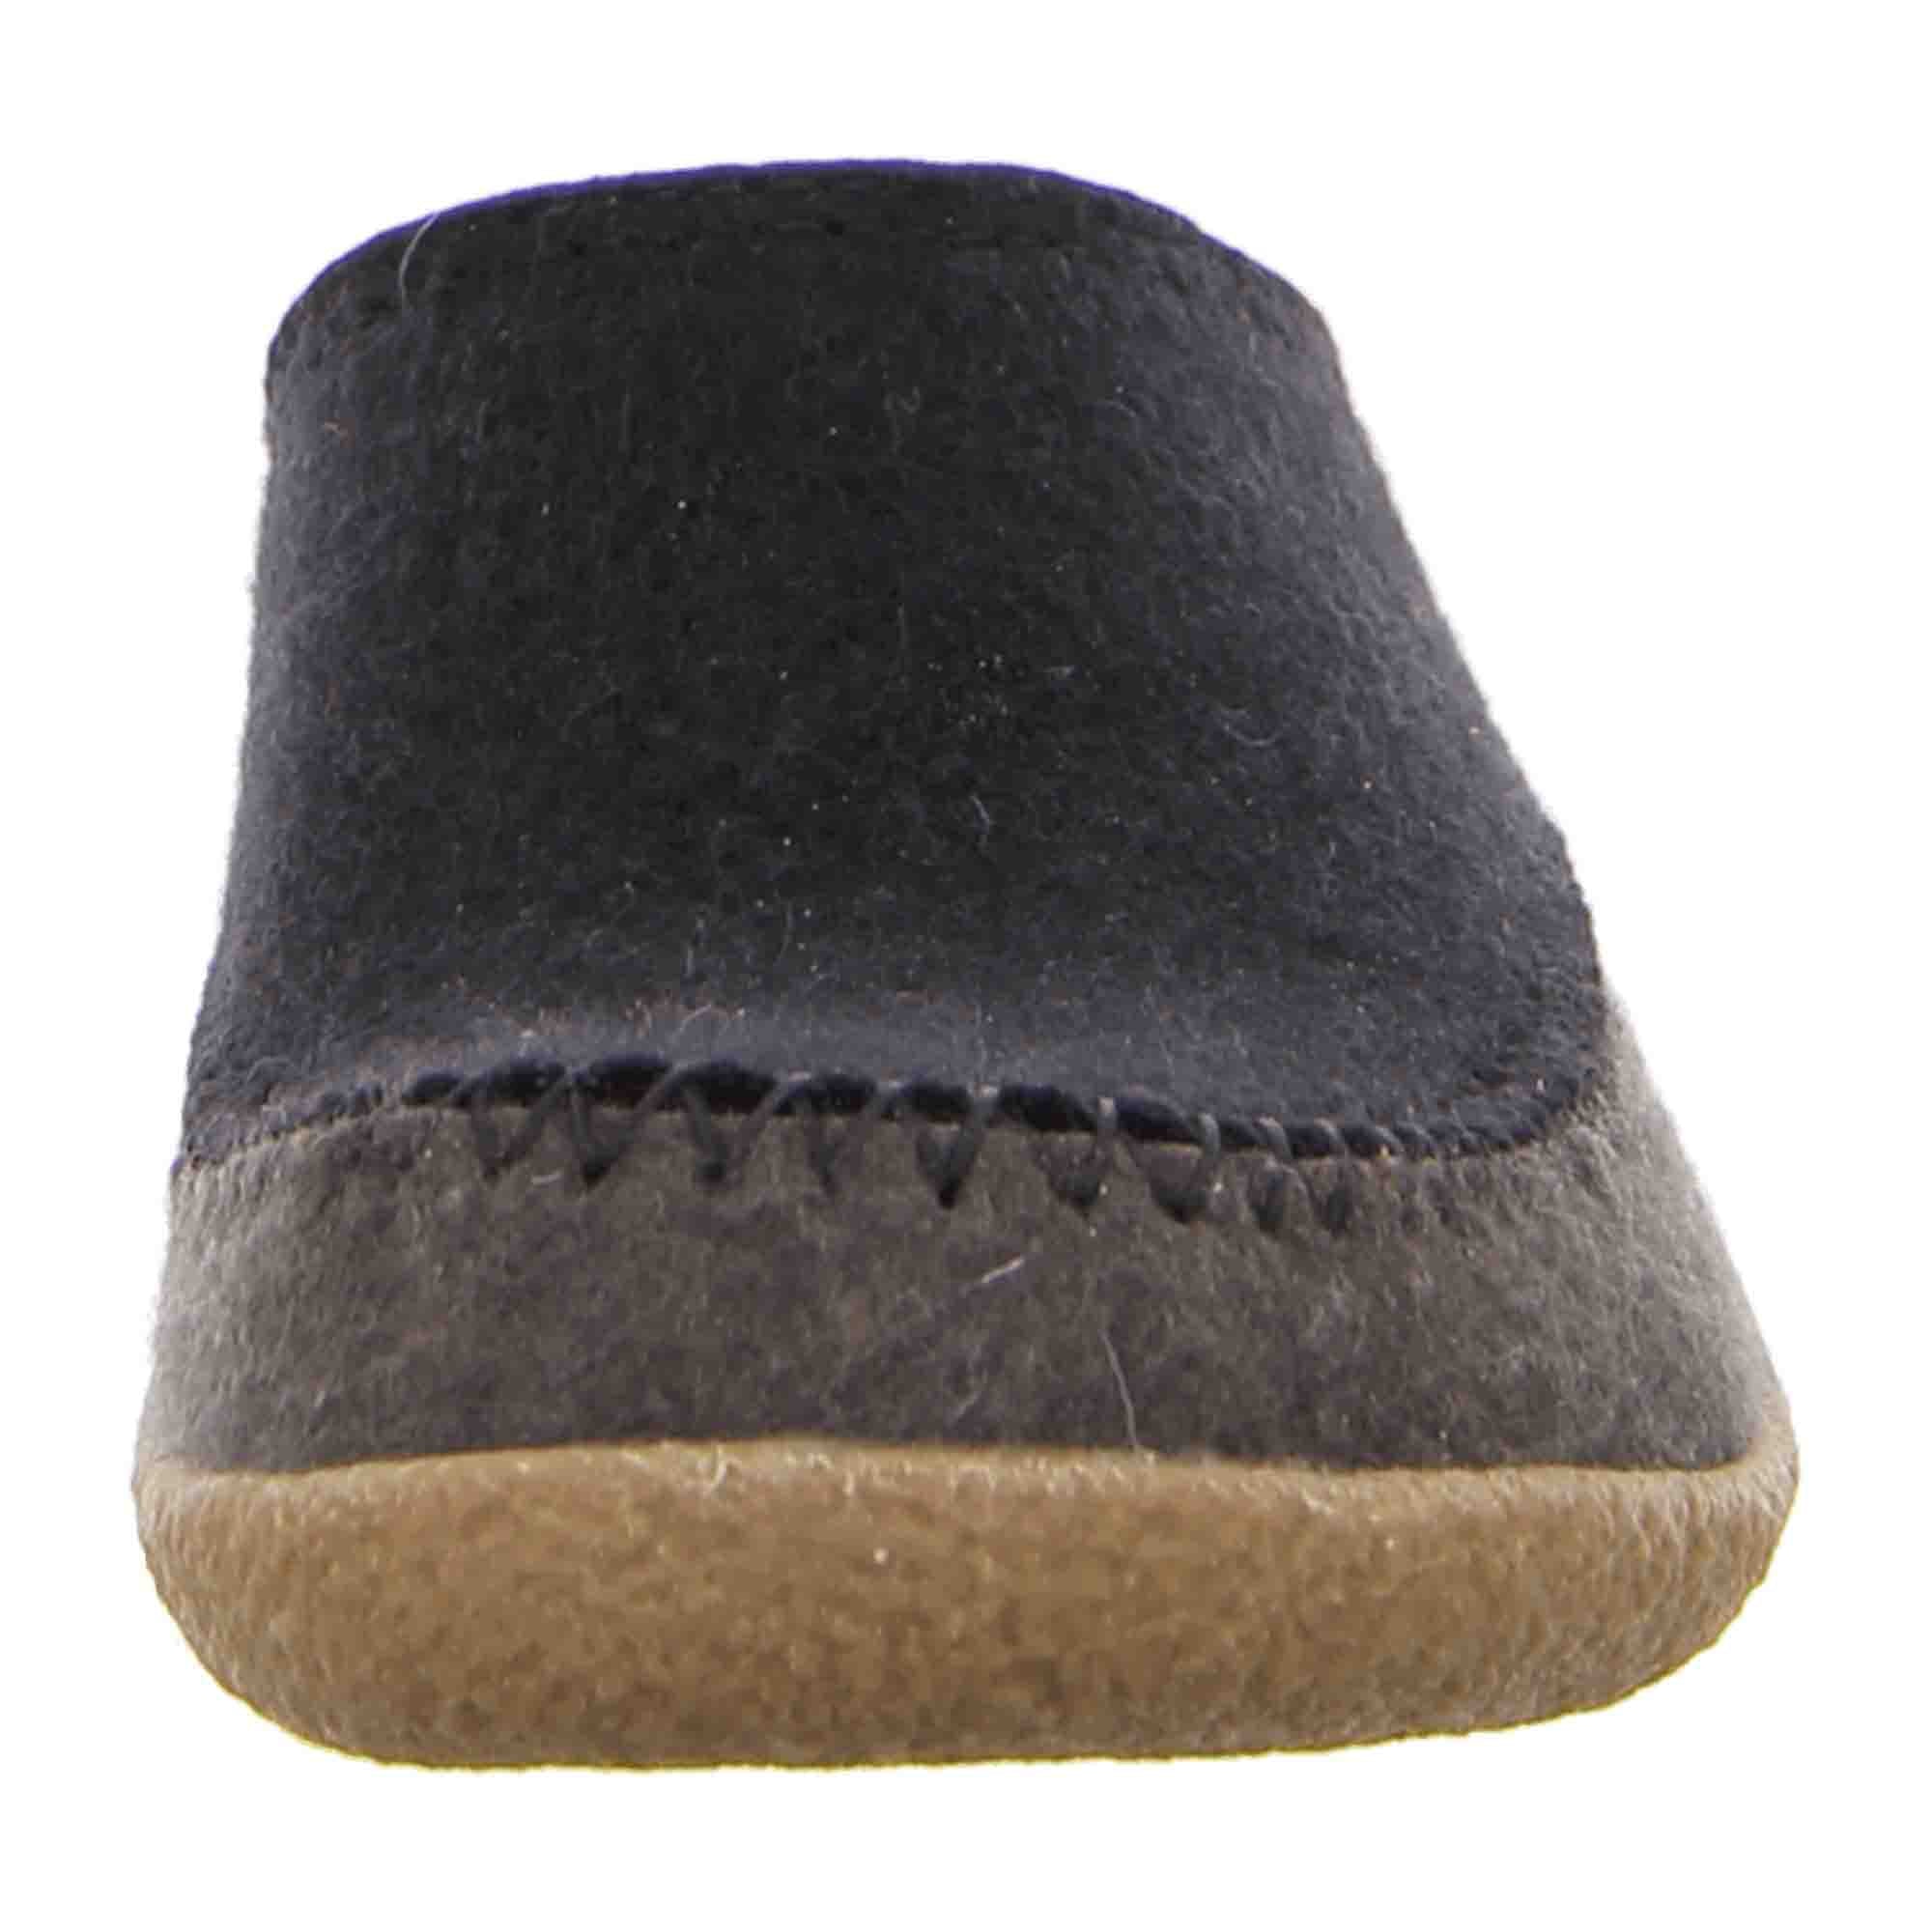 Haflinger Blizzard Credo-Duo Men's Slippers - Durable and Stylish Black Wool Slippers